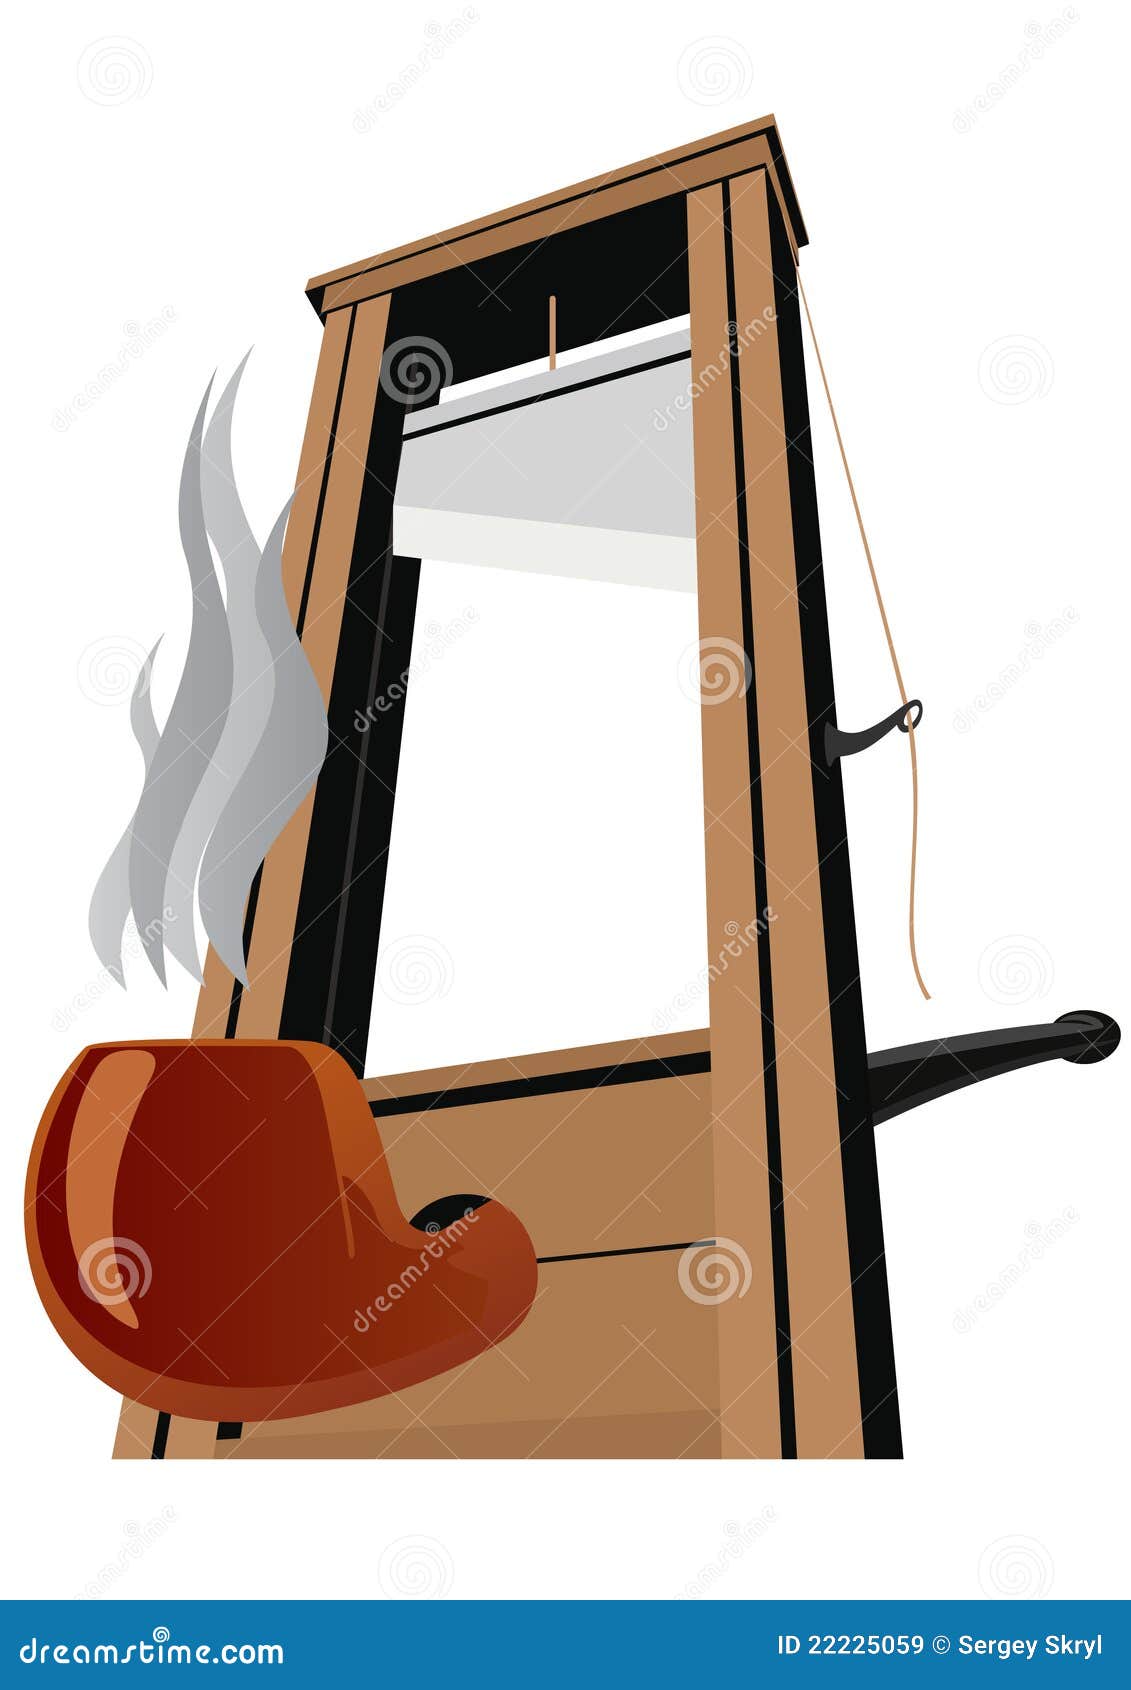 clipart guillotine pictures - photo #21